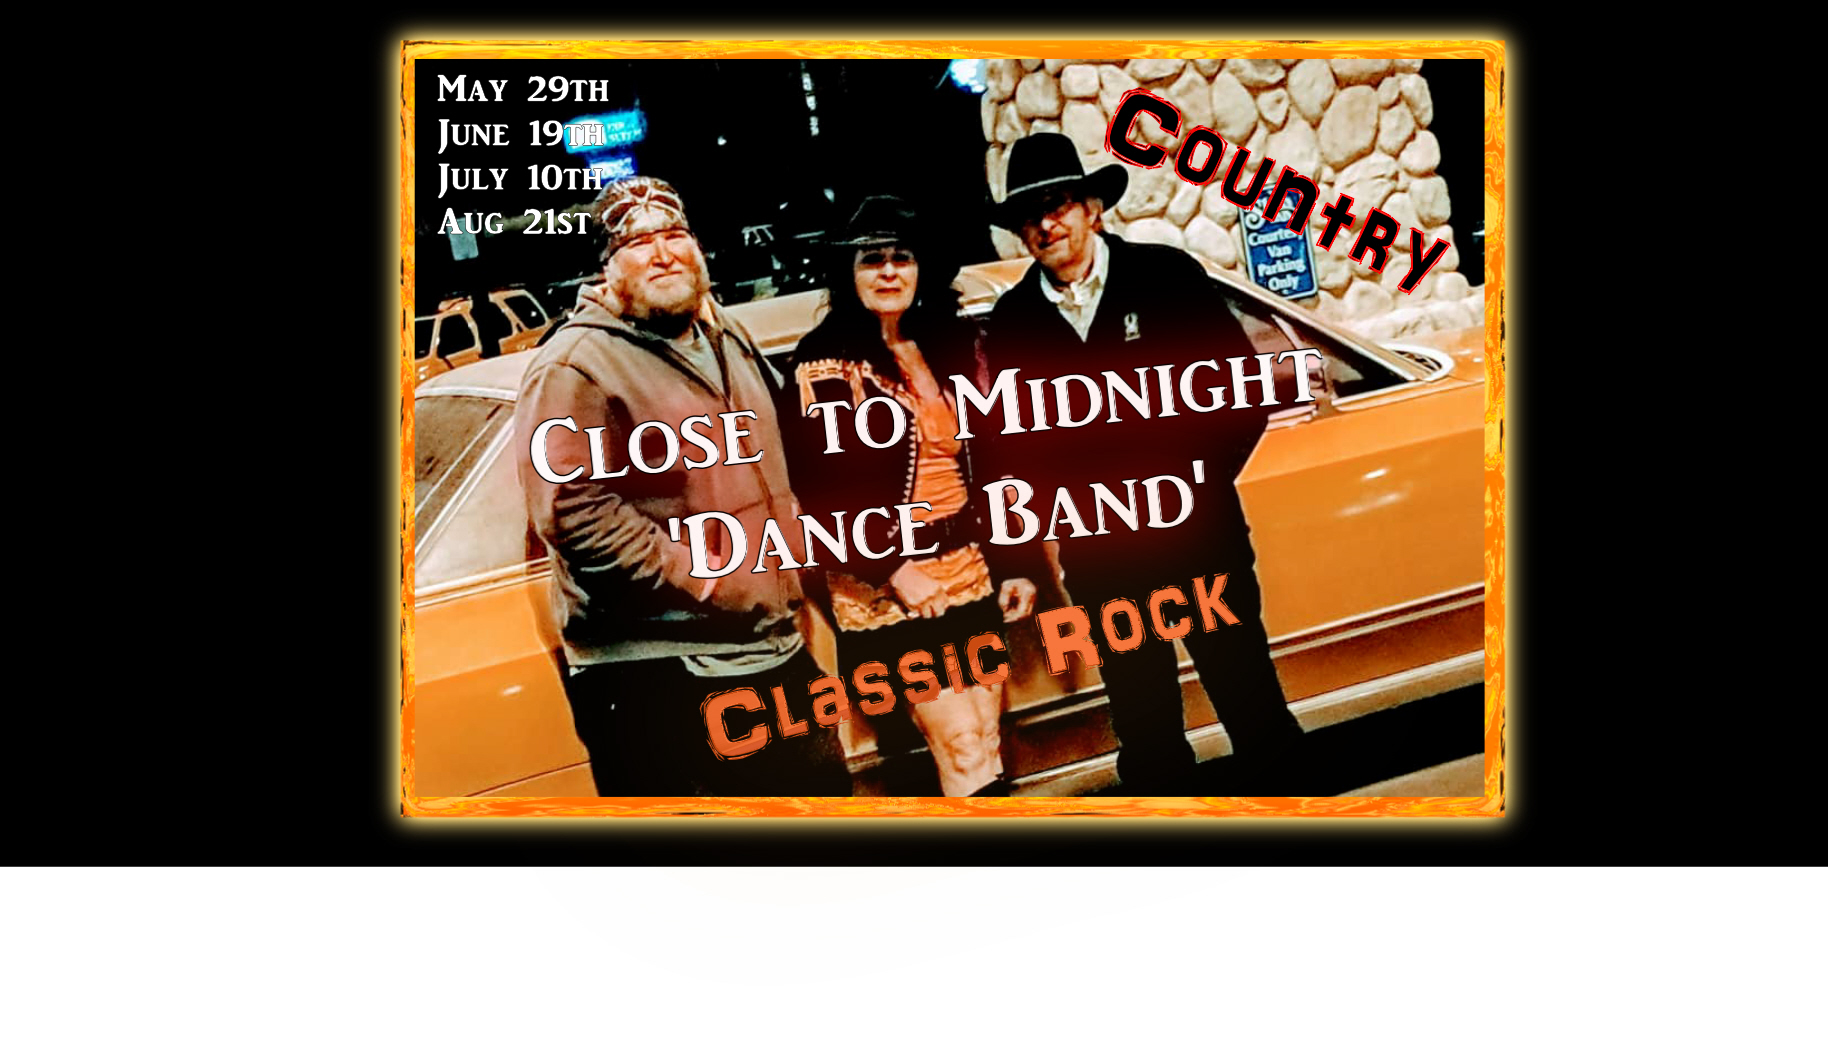 Live Country and Classic Rock Band - Close to Midnight